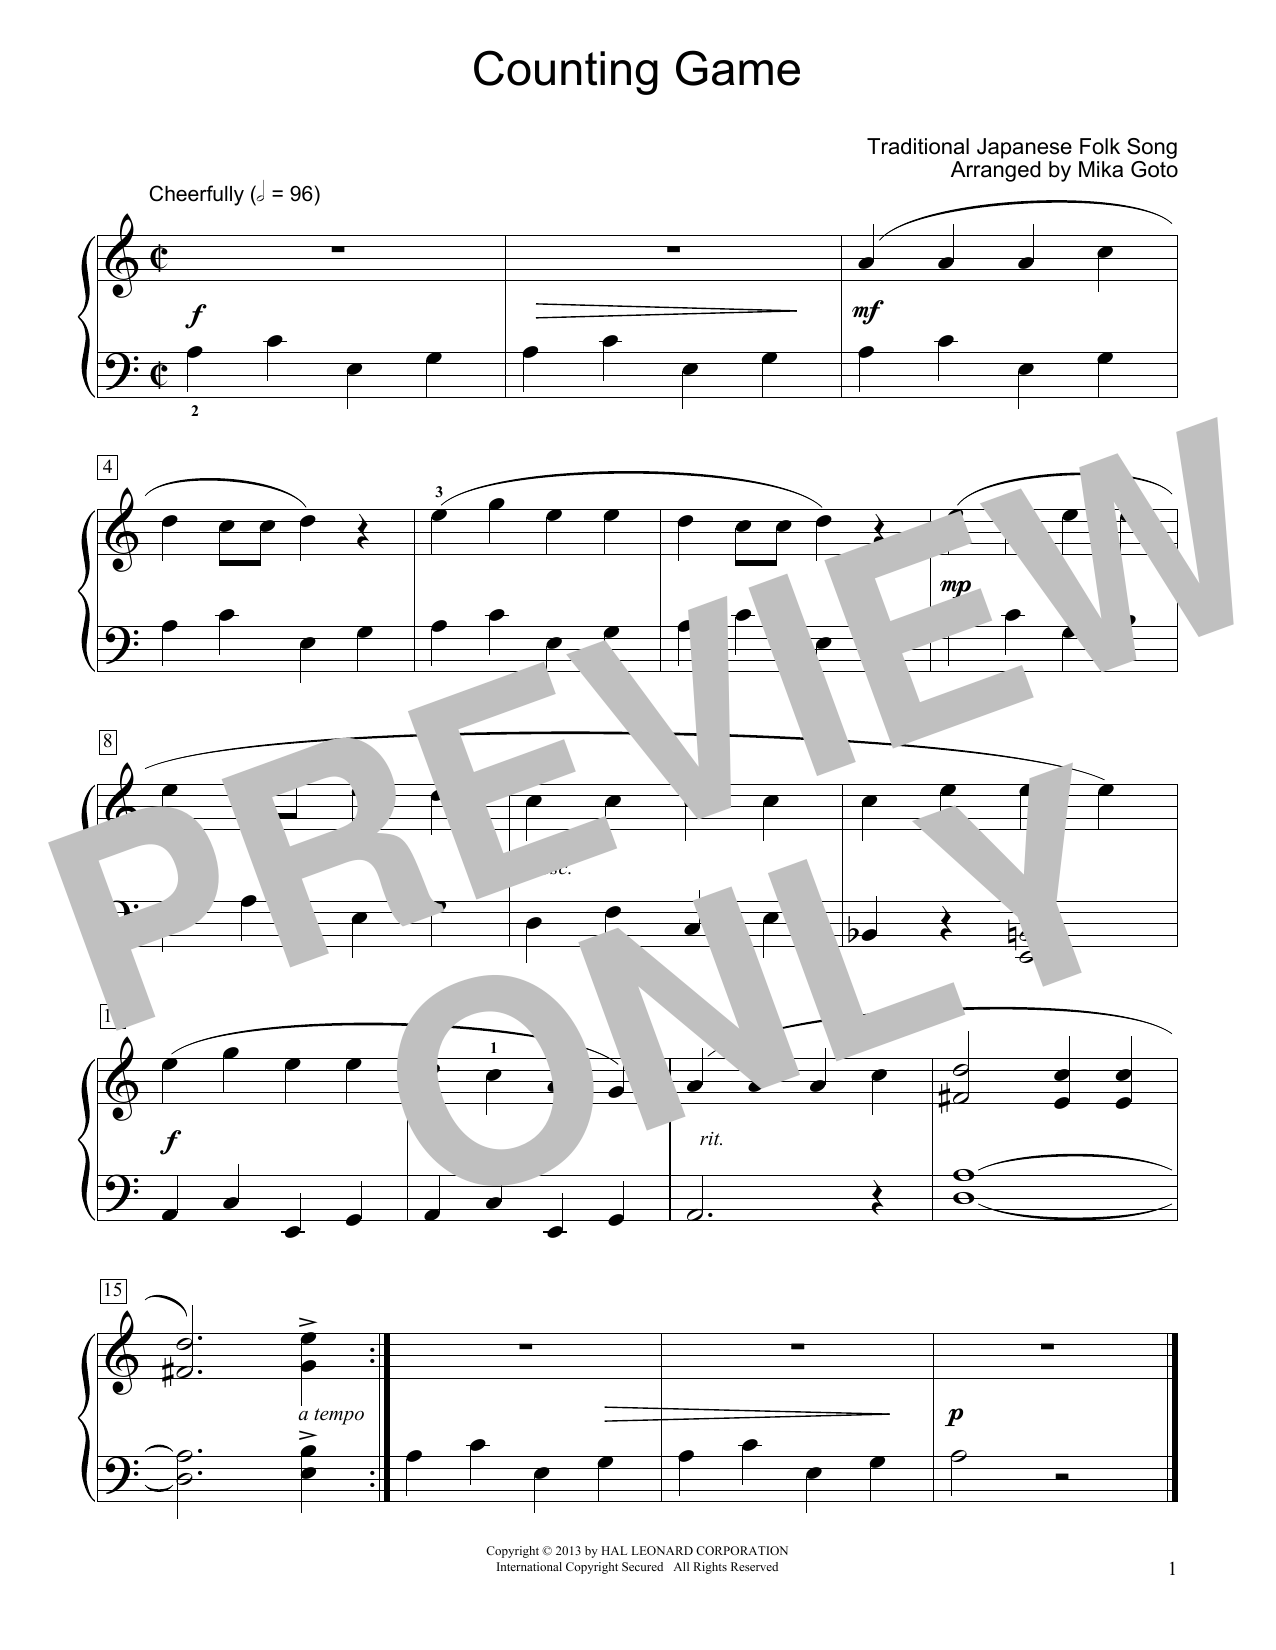 Download Traditional Japanese Folk Song Counting Game (arr. Mika Goto) Sheet Music